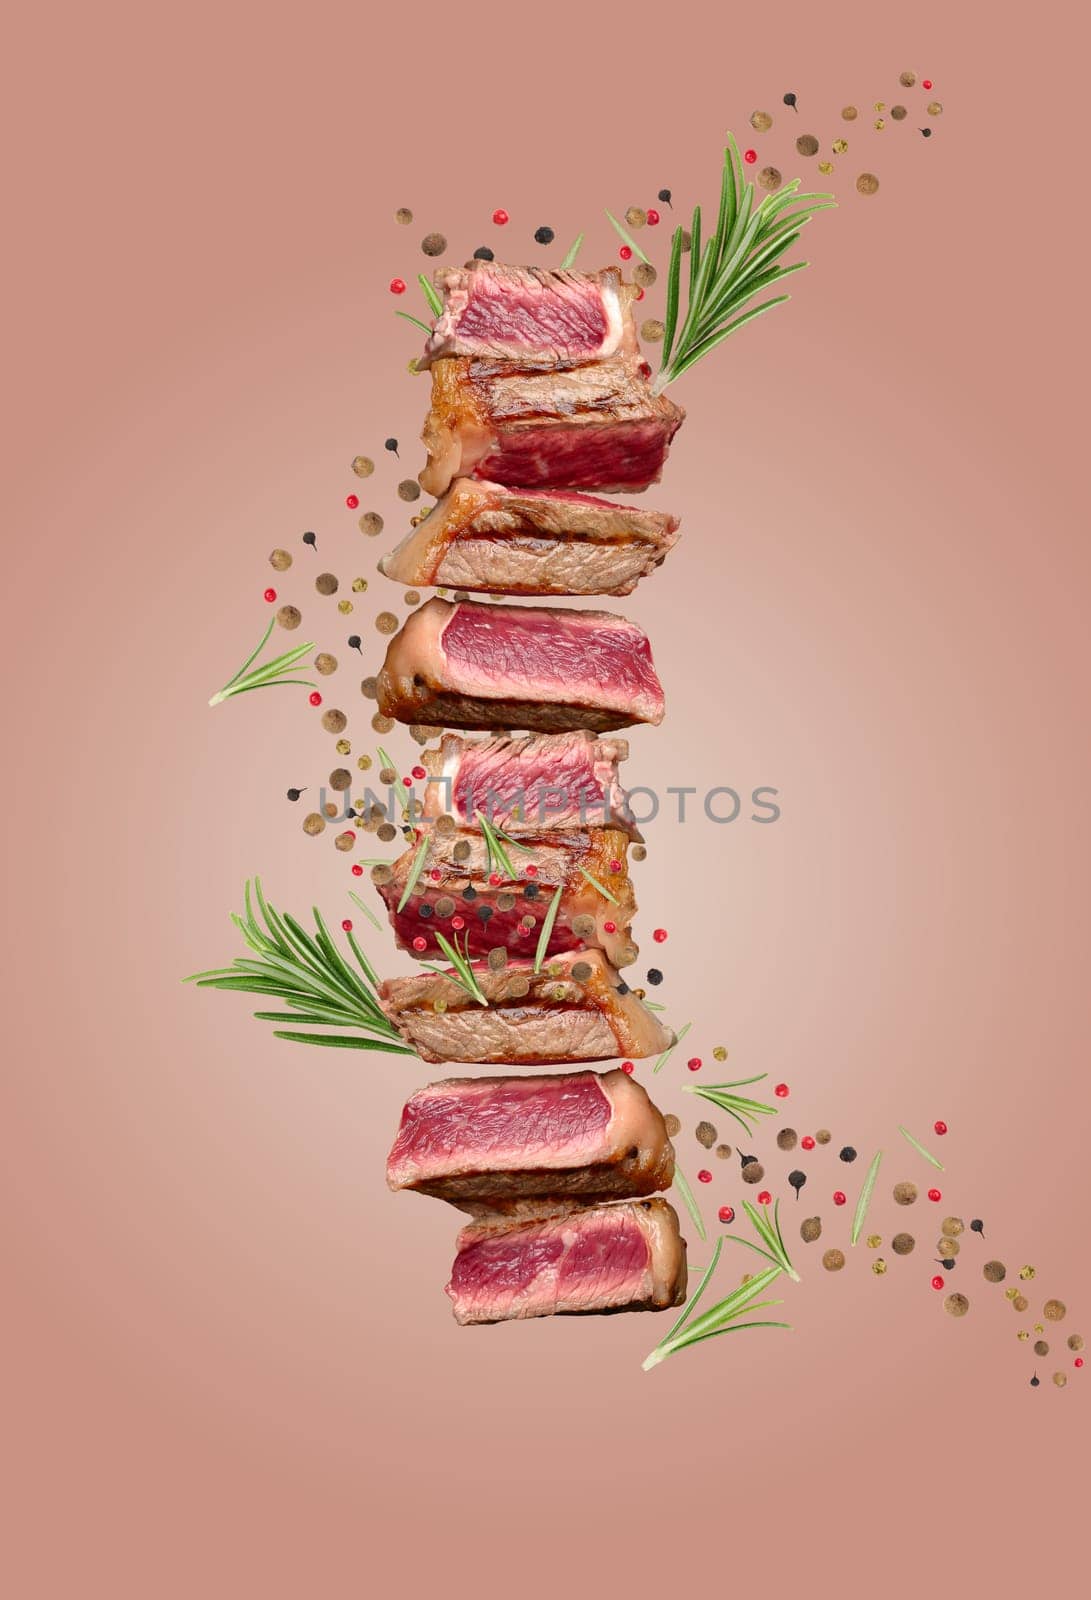 Sliced fried beef steak New York with spices and a sprig of rosemary, degree of doneness rare by ndanko